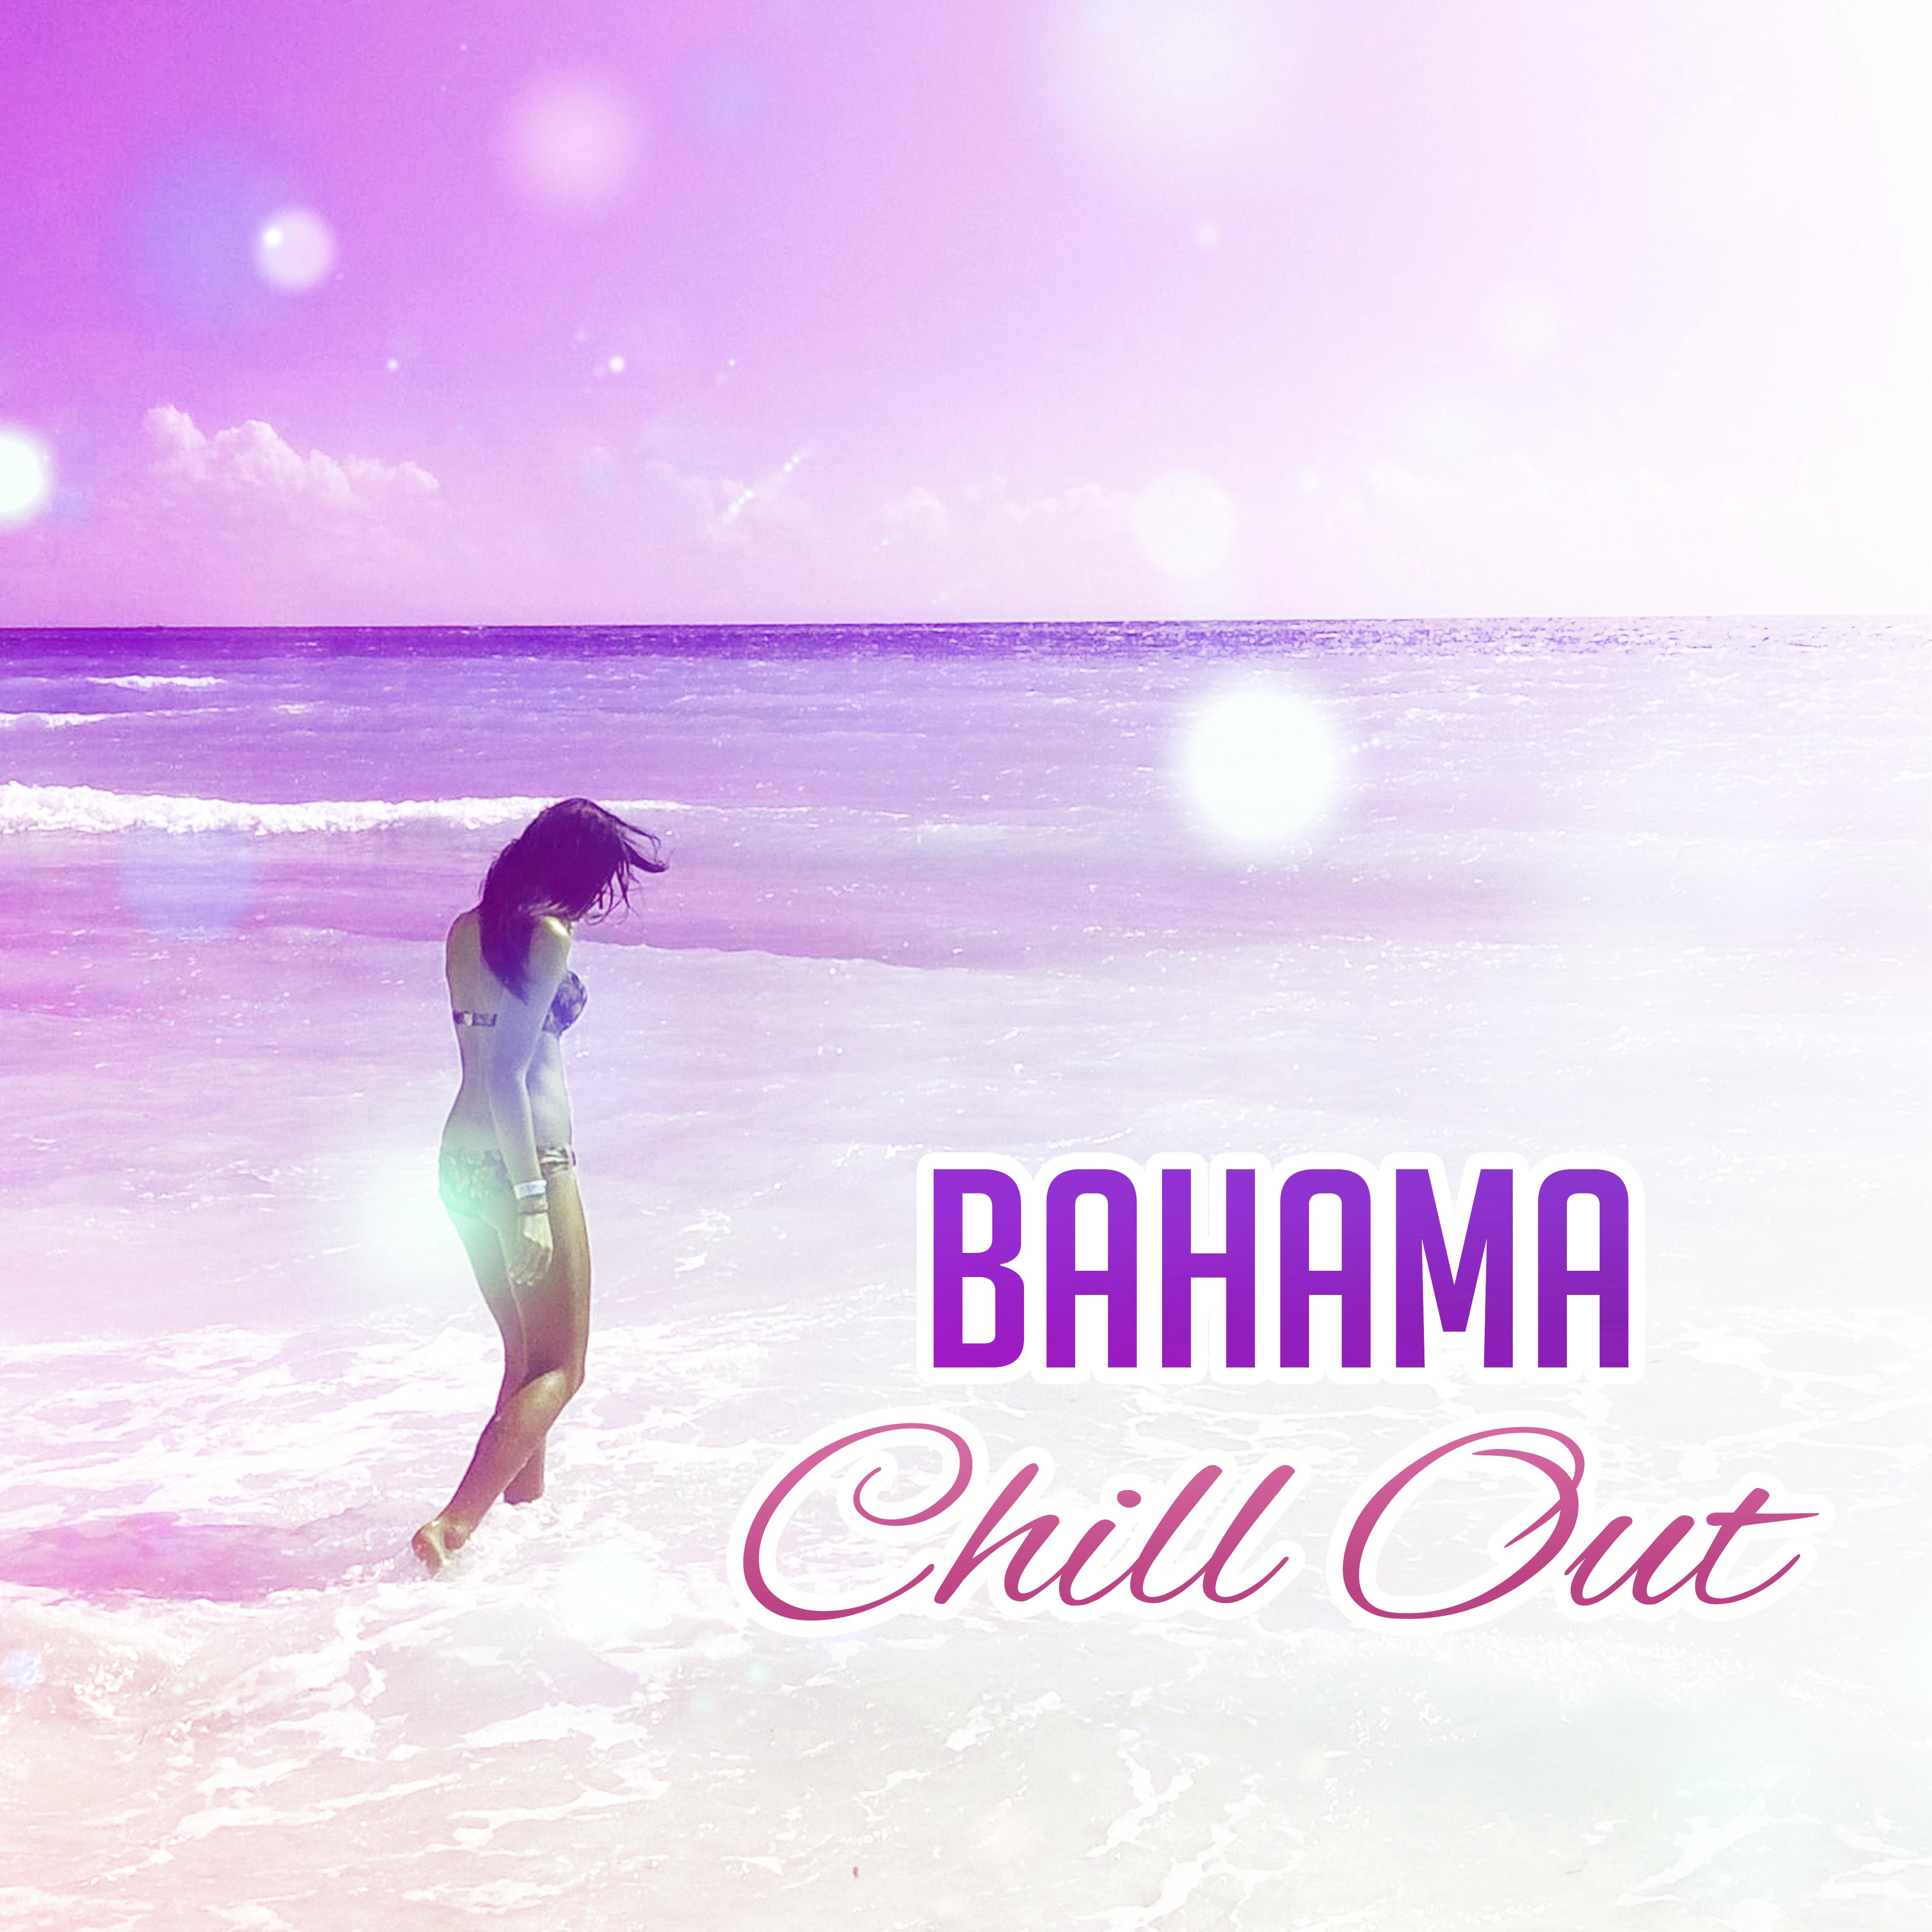 Bahama Chill Out  Summer Chill Out 2017, Holiday Vibes, Stress Relief, Music to Calm Down